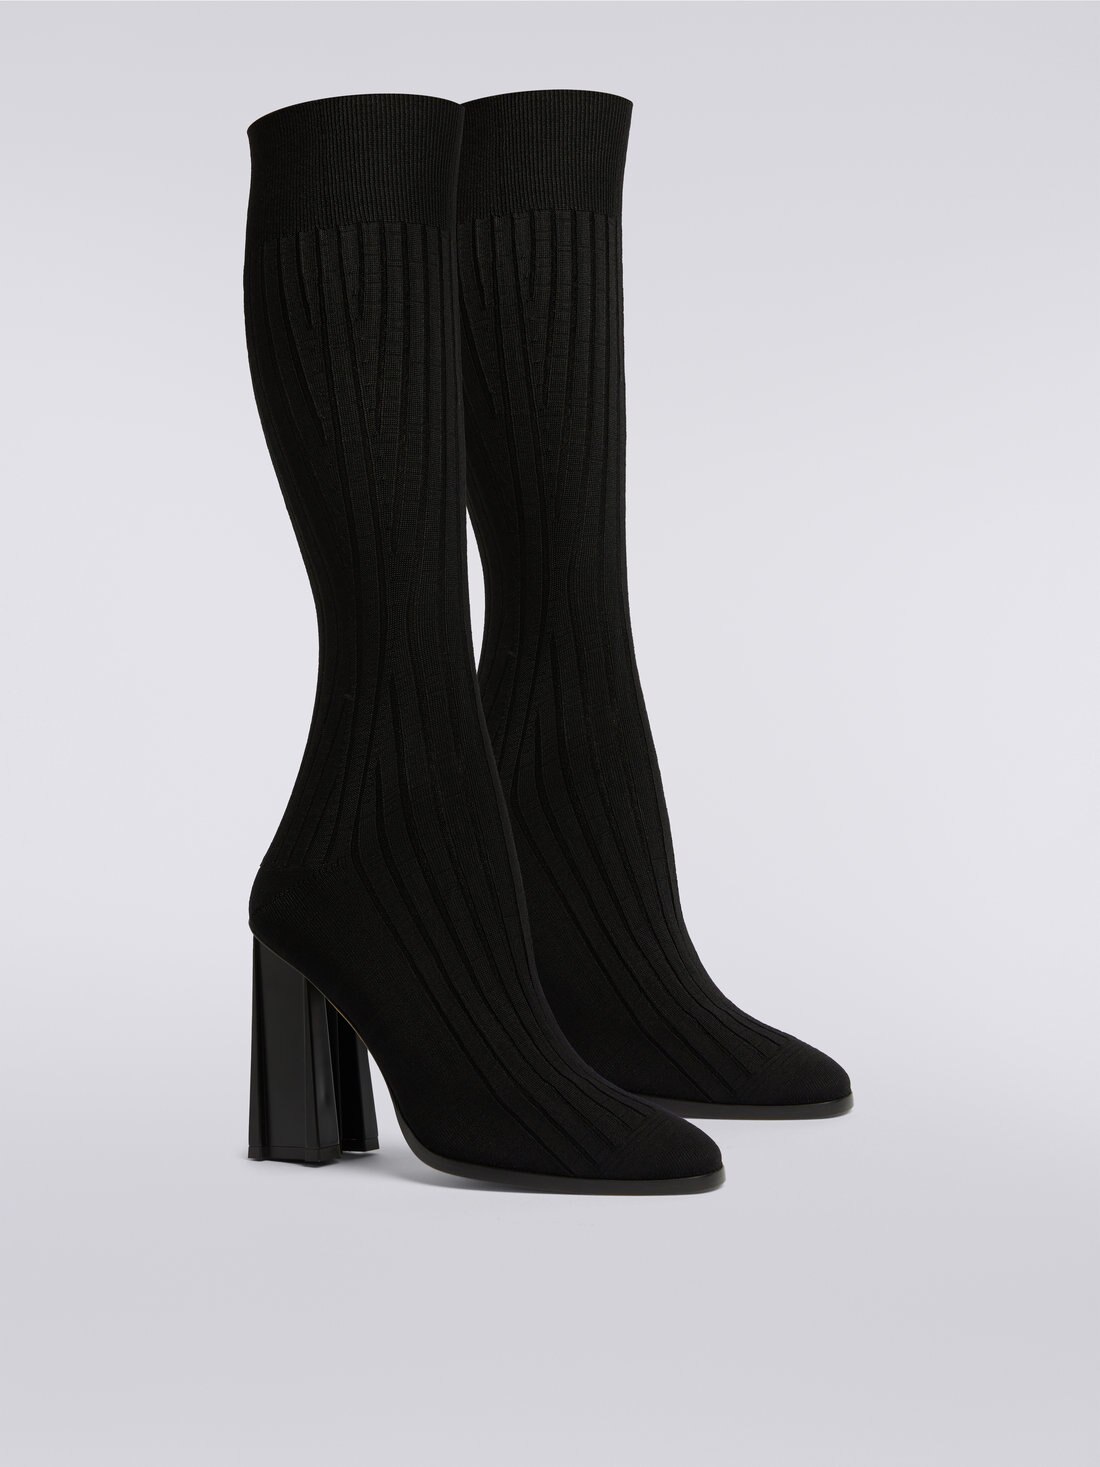 High-heel knit boots , Black    - AS23WY04BK028R93911 - 1